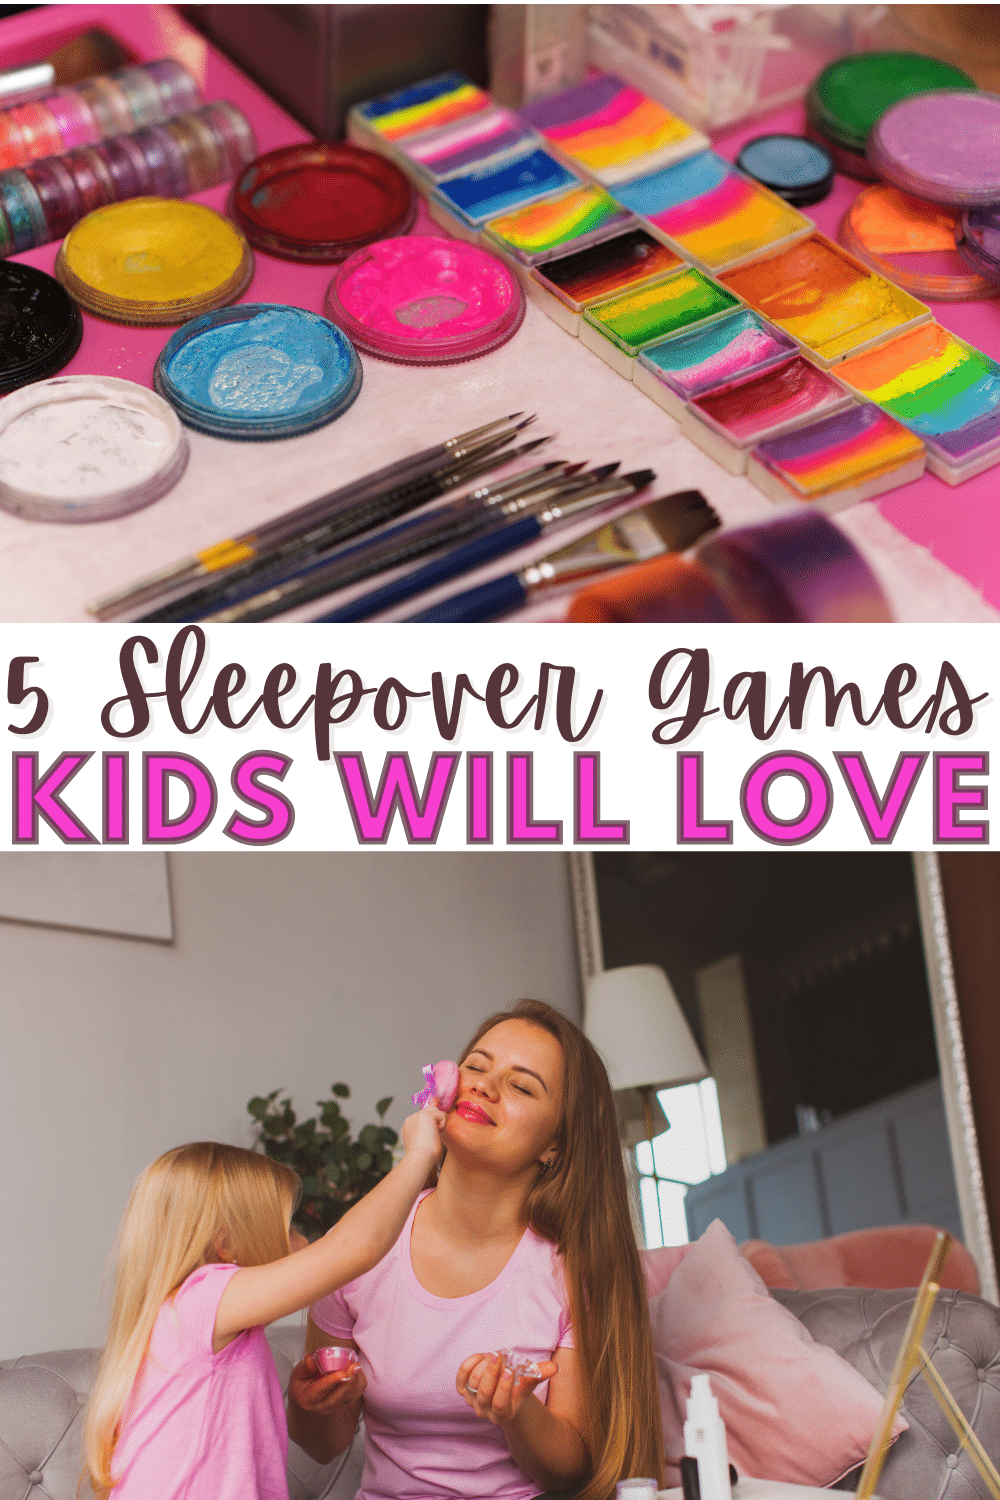 Kids love sleepovers but it can be tough to plan activities for all those hours! Try these sleepover games for tons of sleepover fun.#sleepover #sleepovers #kidsactivities #tweens via @wondermomwannab